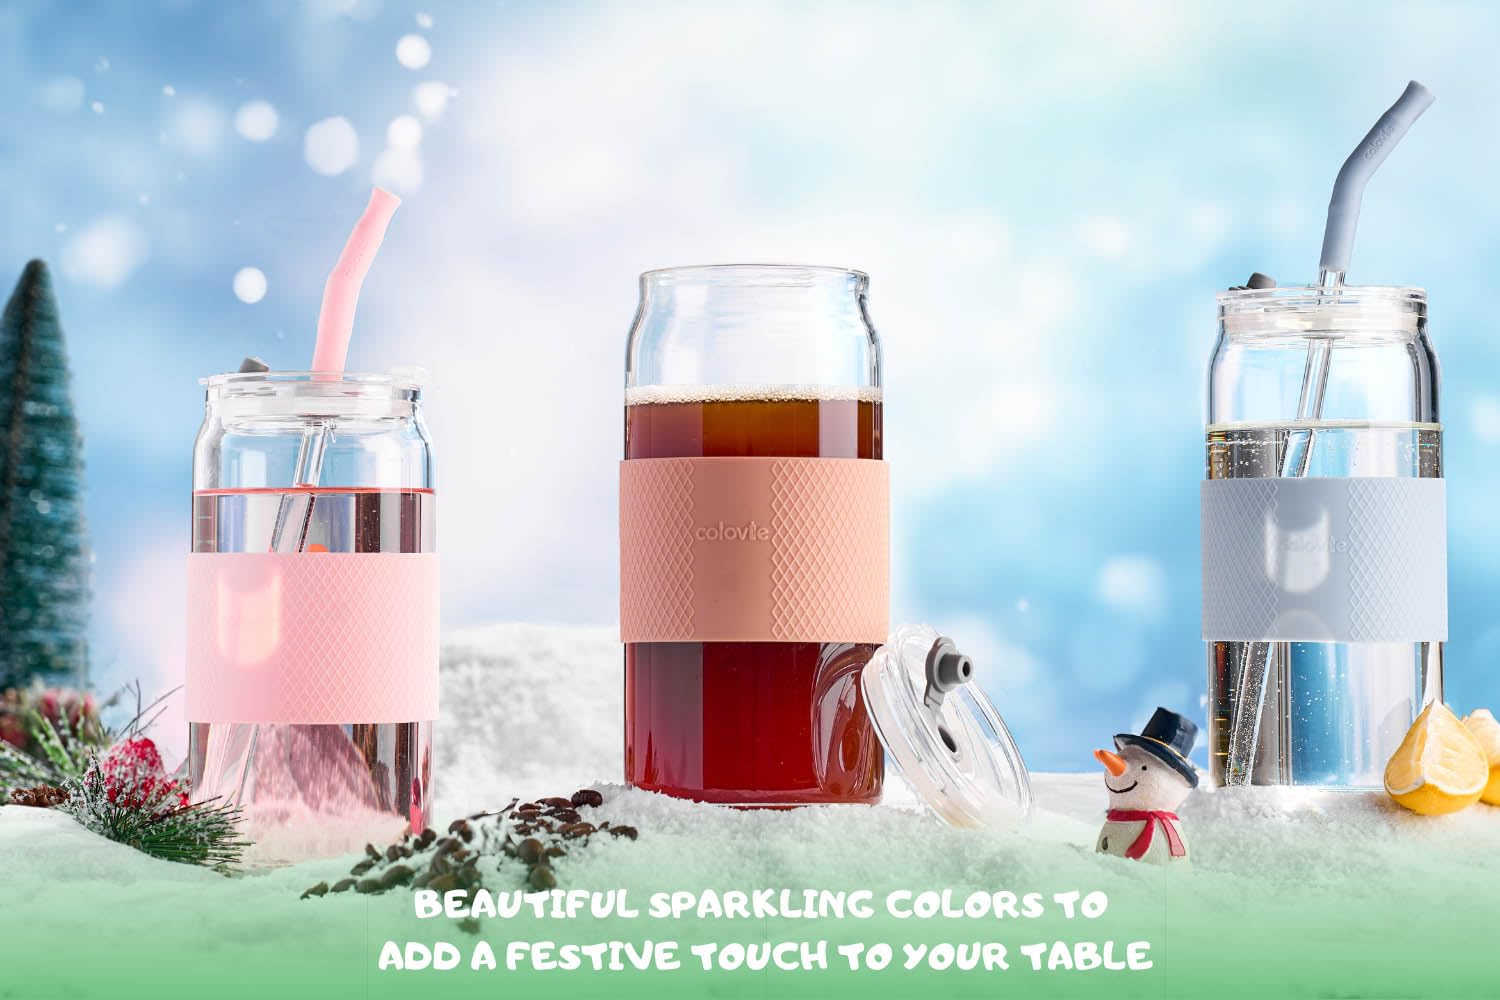 ColoVie 20oz Mixed Drinking Glasses with 6 Colors, Thicken Reusable Glass Tumblers with Lids and Straws, Removable Silicone Sleeve for Hot or Iced Drinking, Unique Colorful Glass Cups